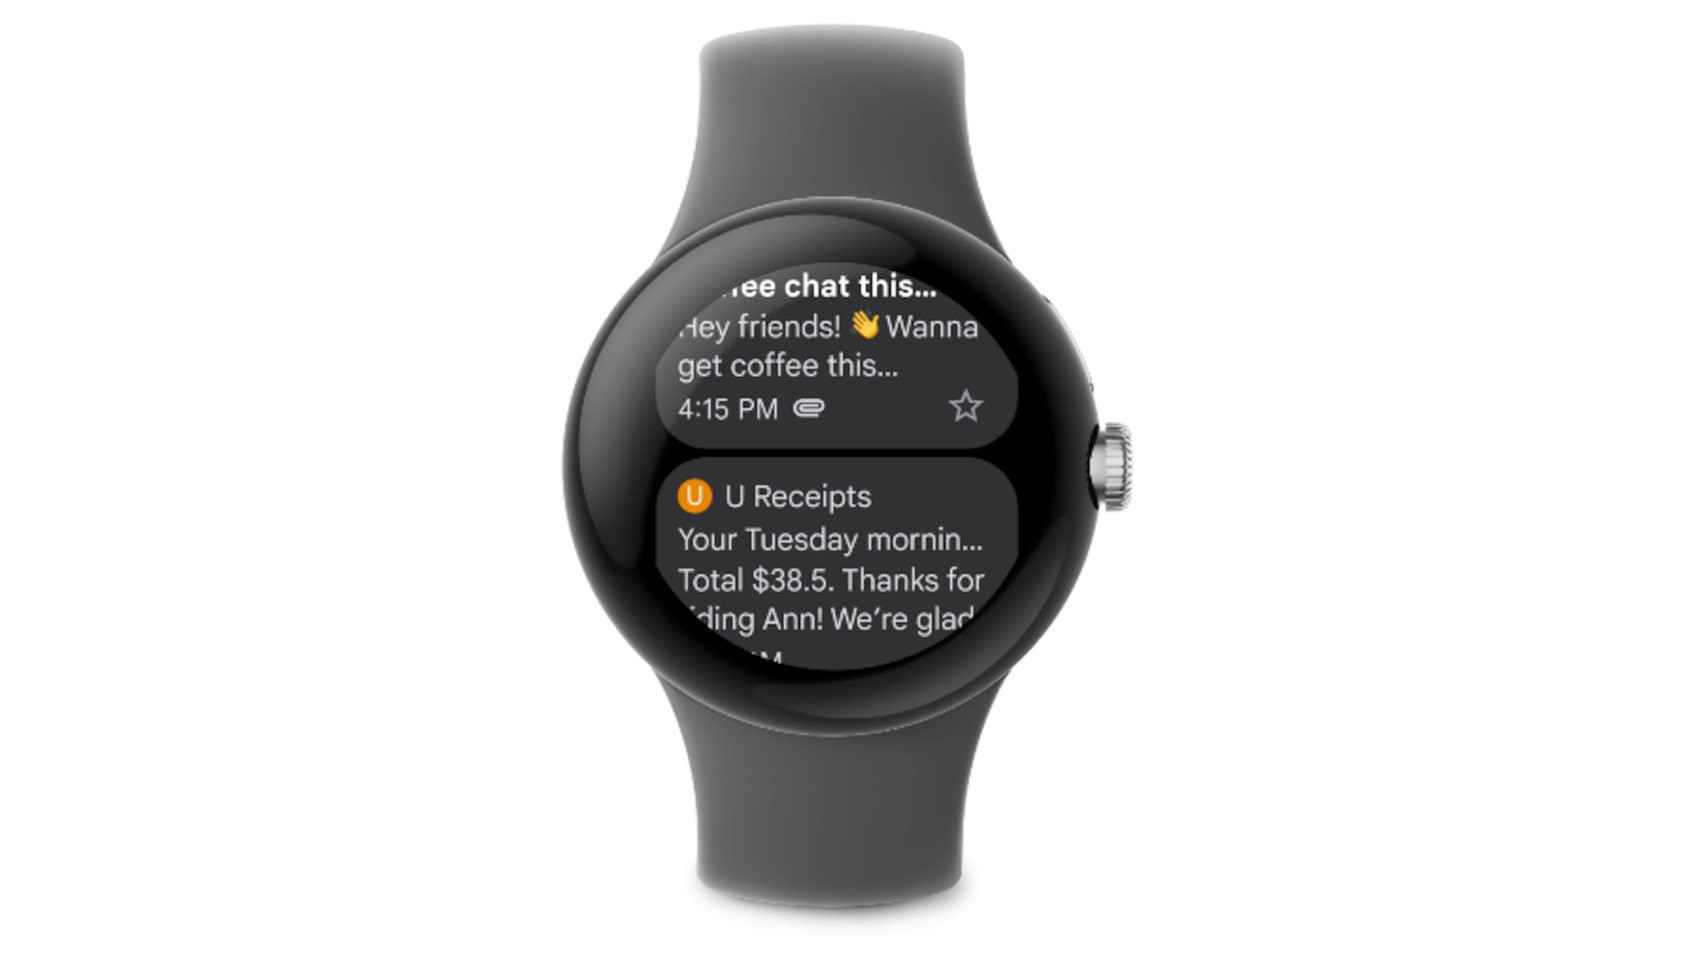 New Gmail app for Wear OS watches